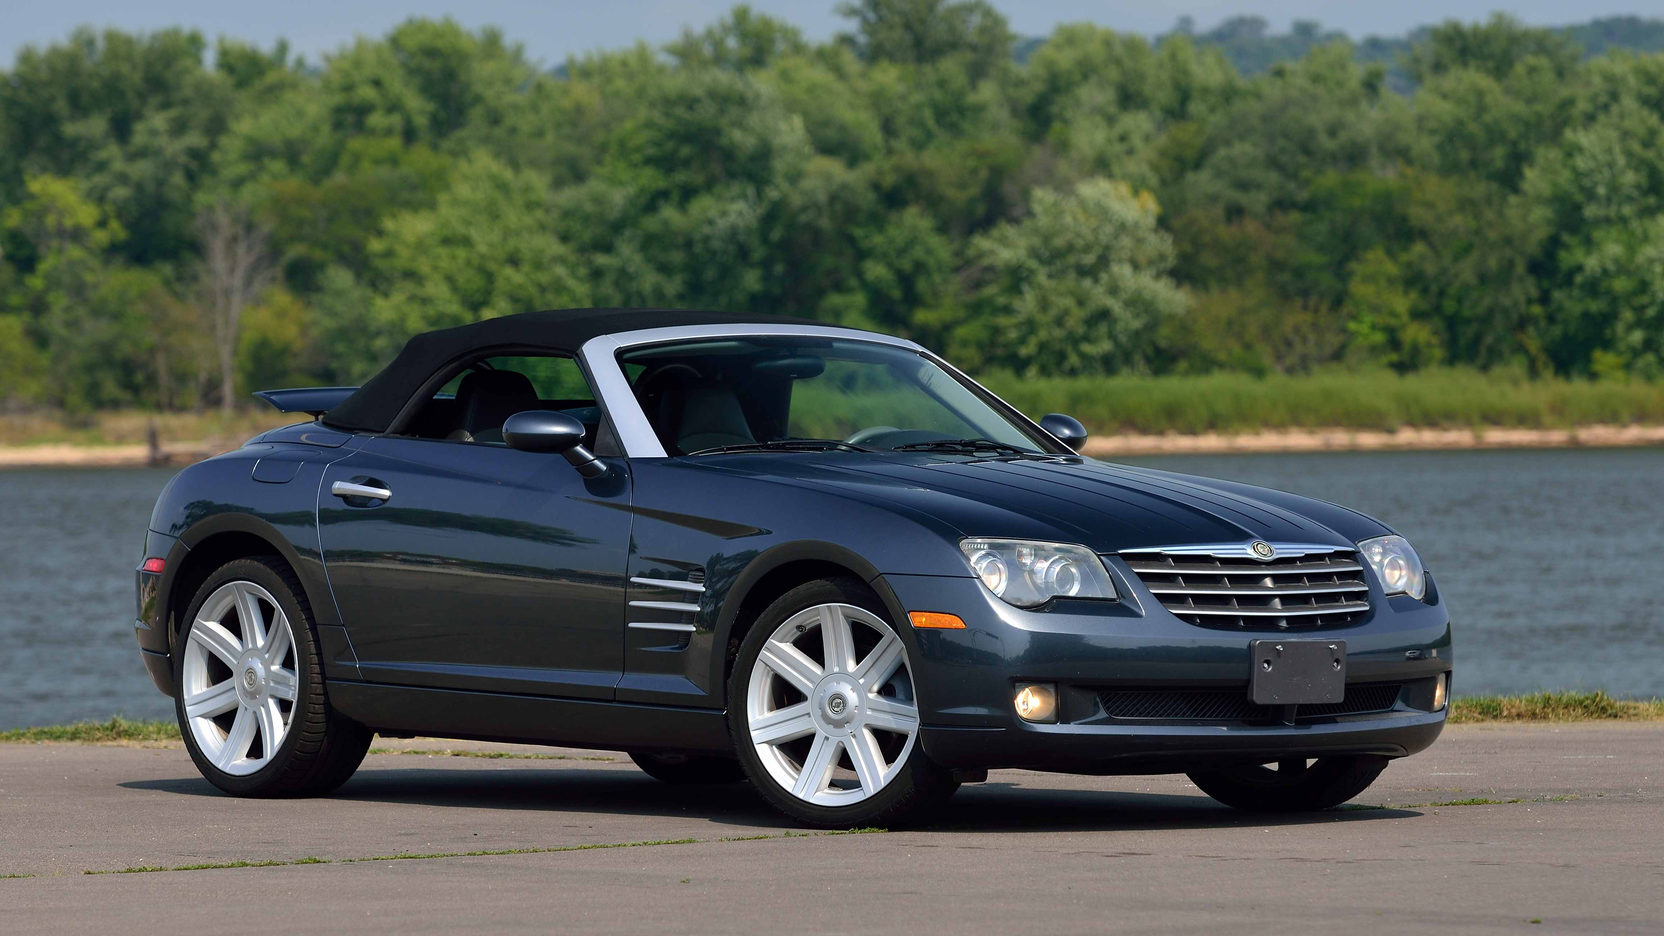 2006 Chrysler Crossfire Convertible | F146 | Chicago 2015